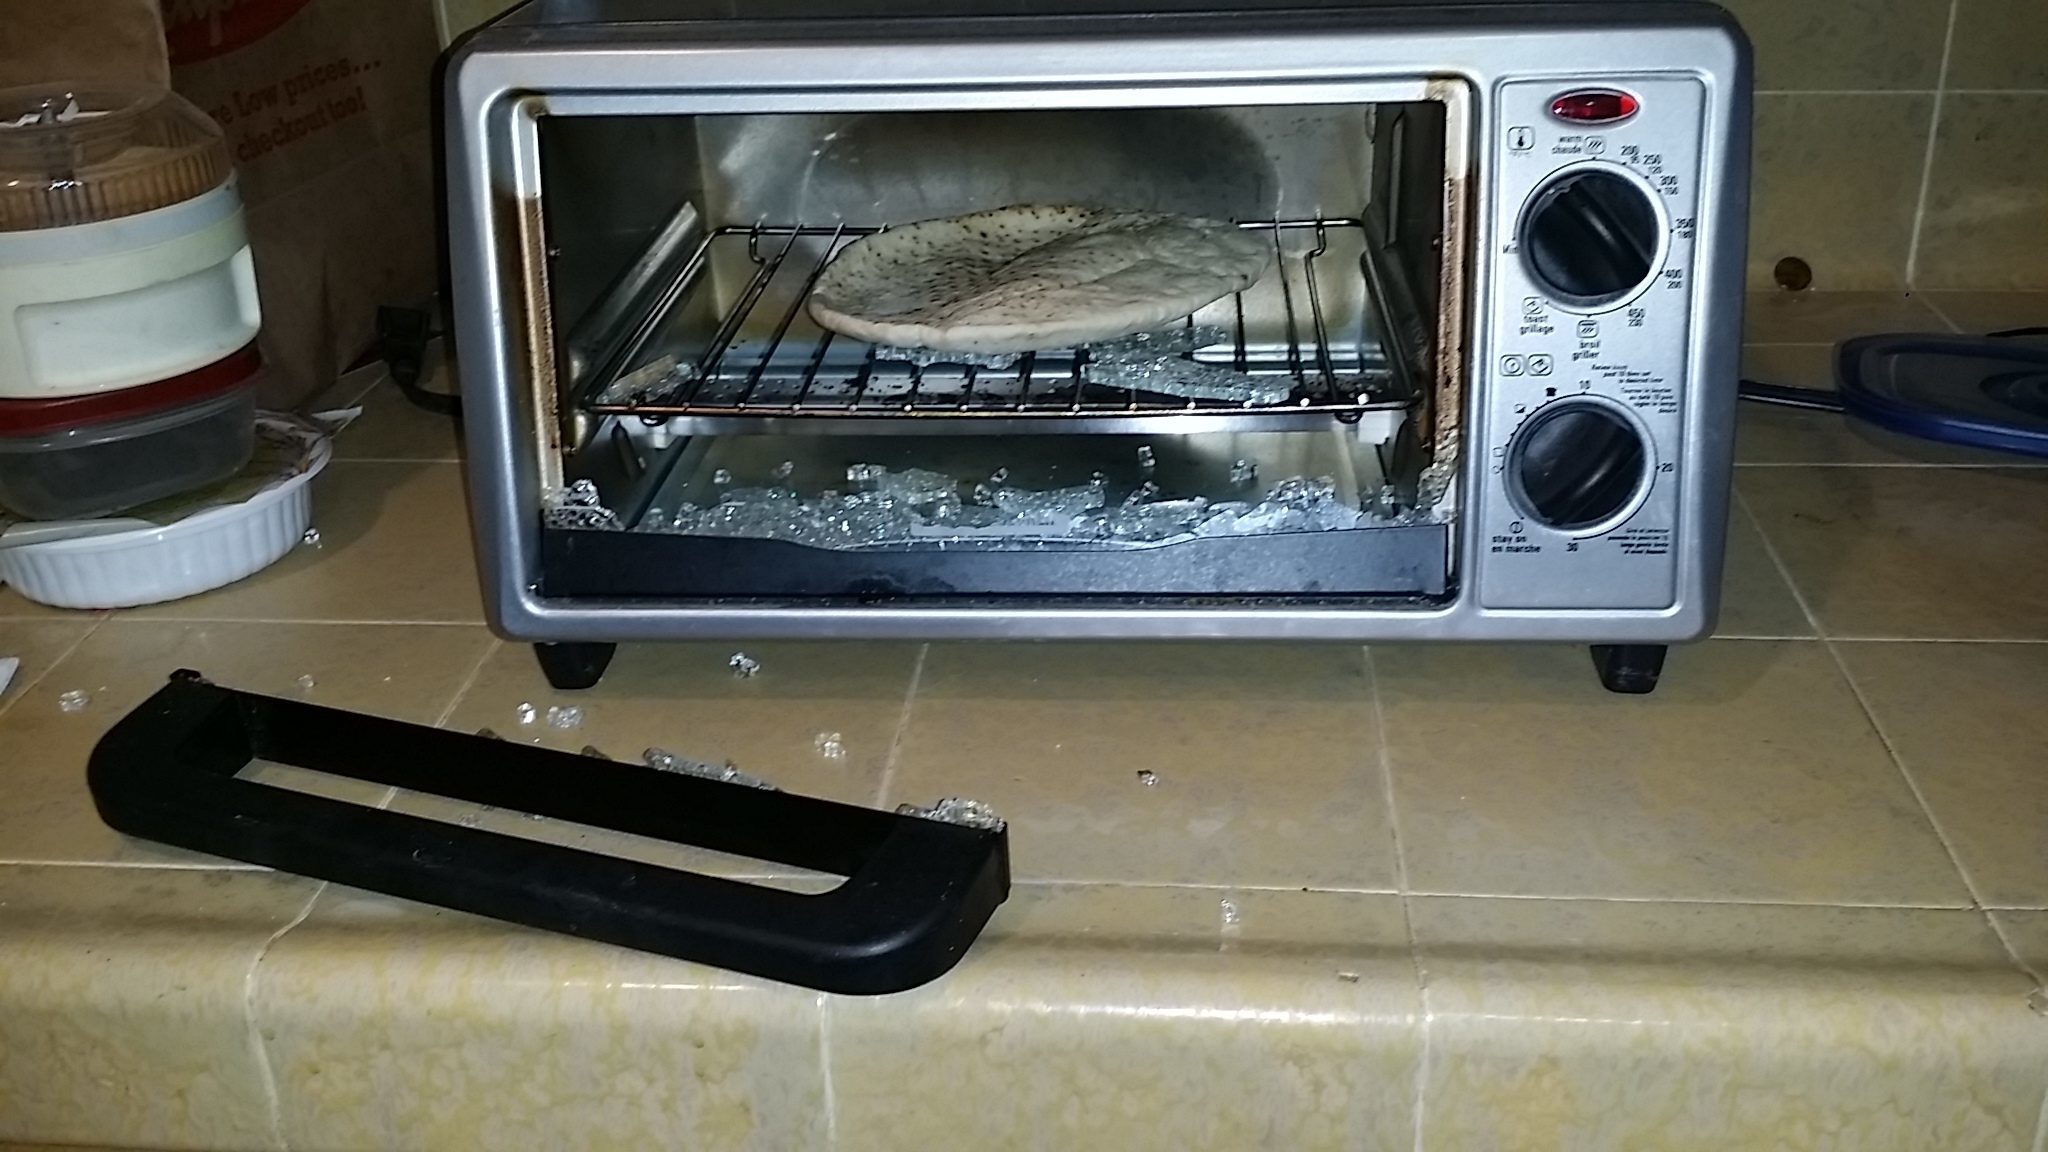 Where can you purchase a Black & Decker toaster oven?